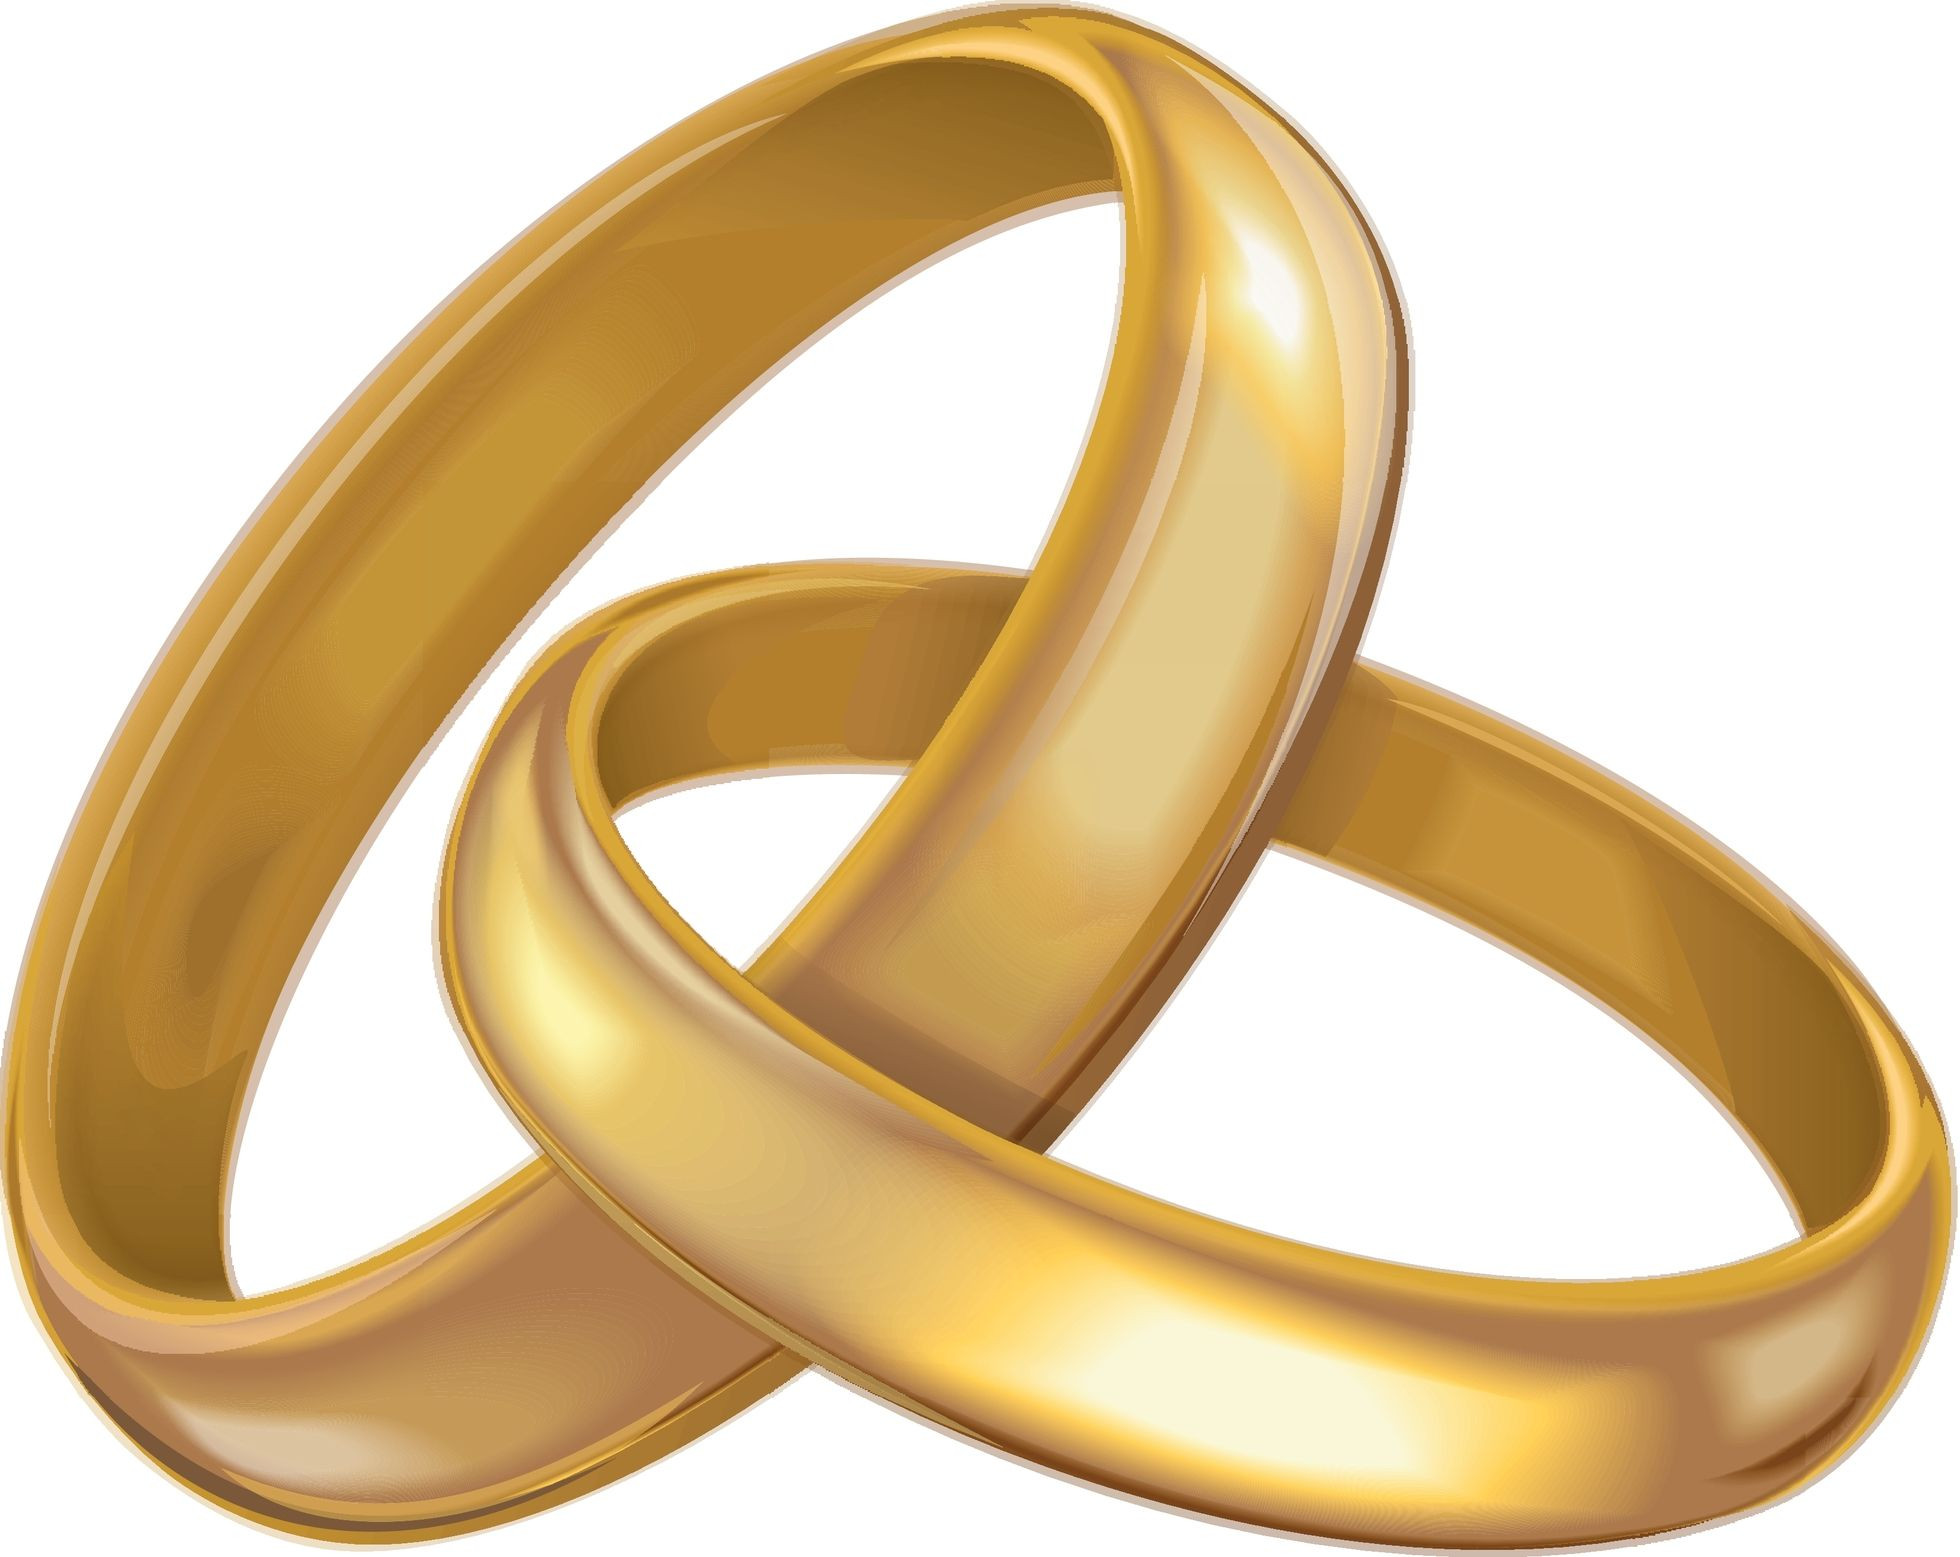 Wedding Rings Clip Art
 Wedding Rings Clipart The Cliparts